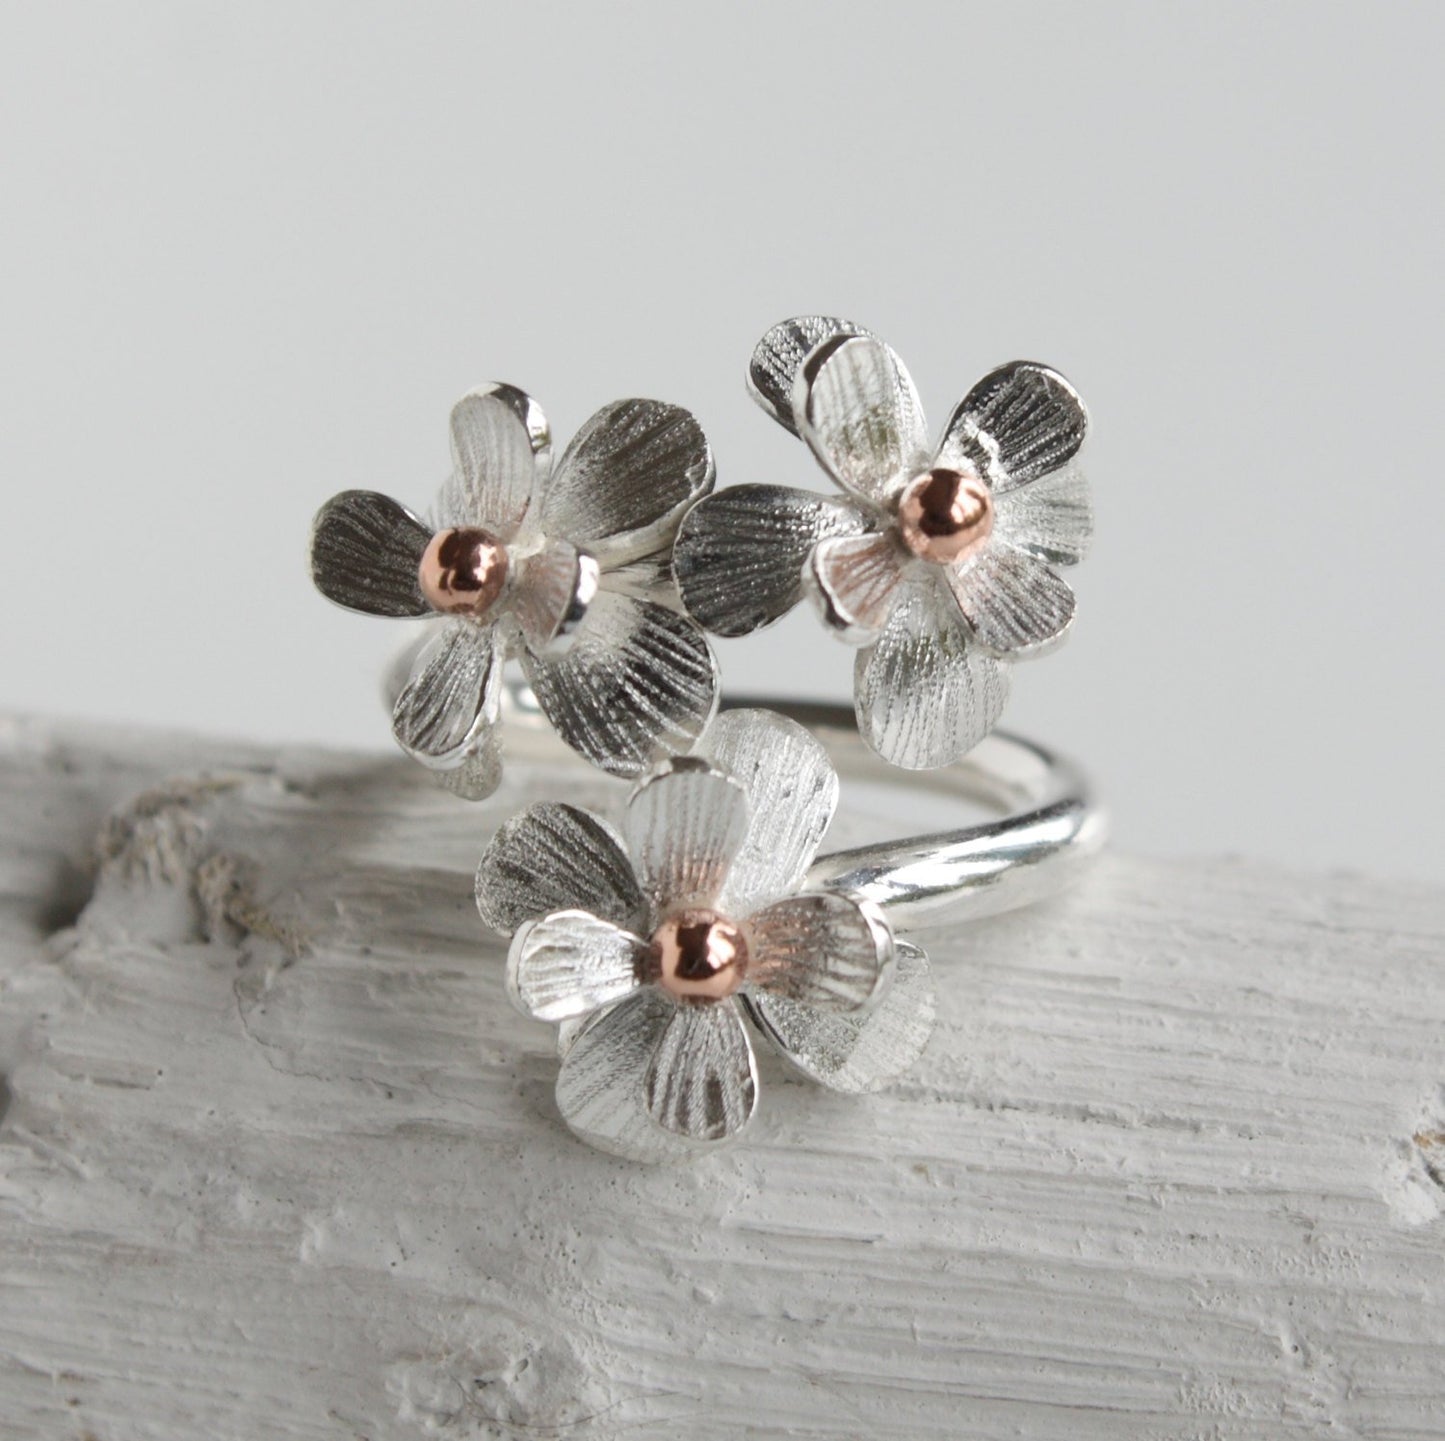 Handmade Adjustable Silver and Rose Gold Daisy Flower Ring-Floral-Botanical Ring